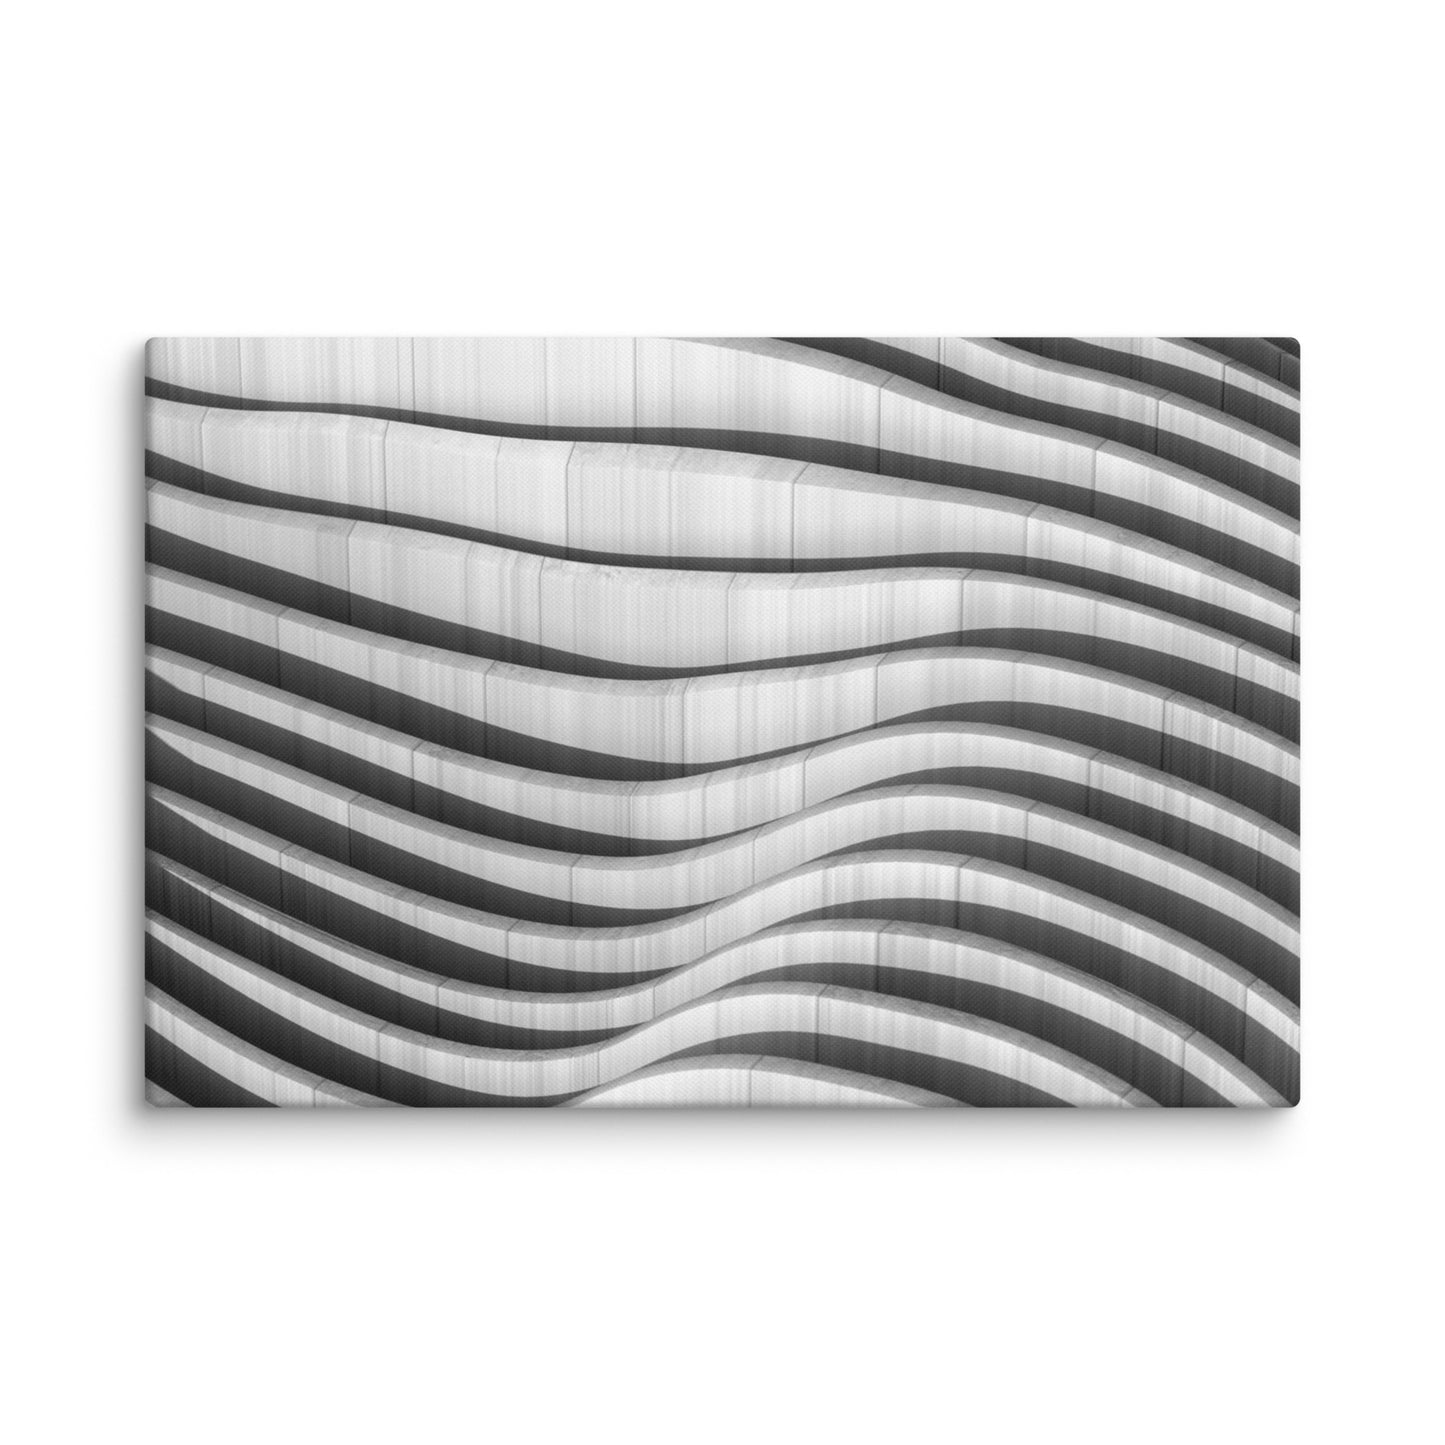 Oceanic Dance Black and White Architectural Photograph Canvas Wall Art Print